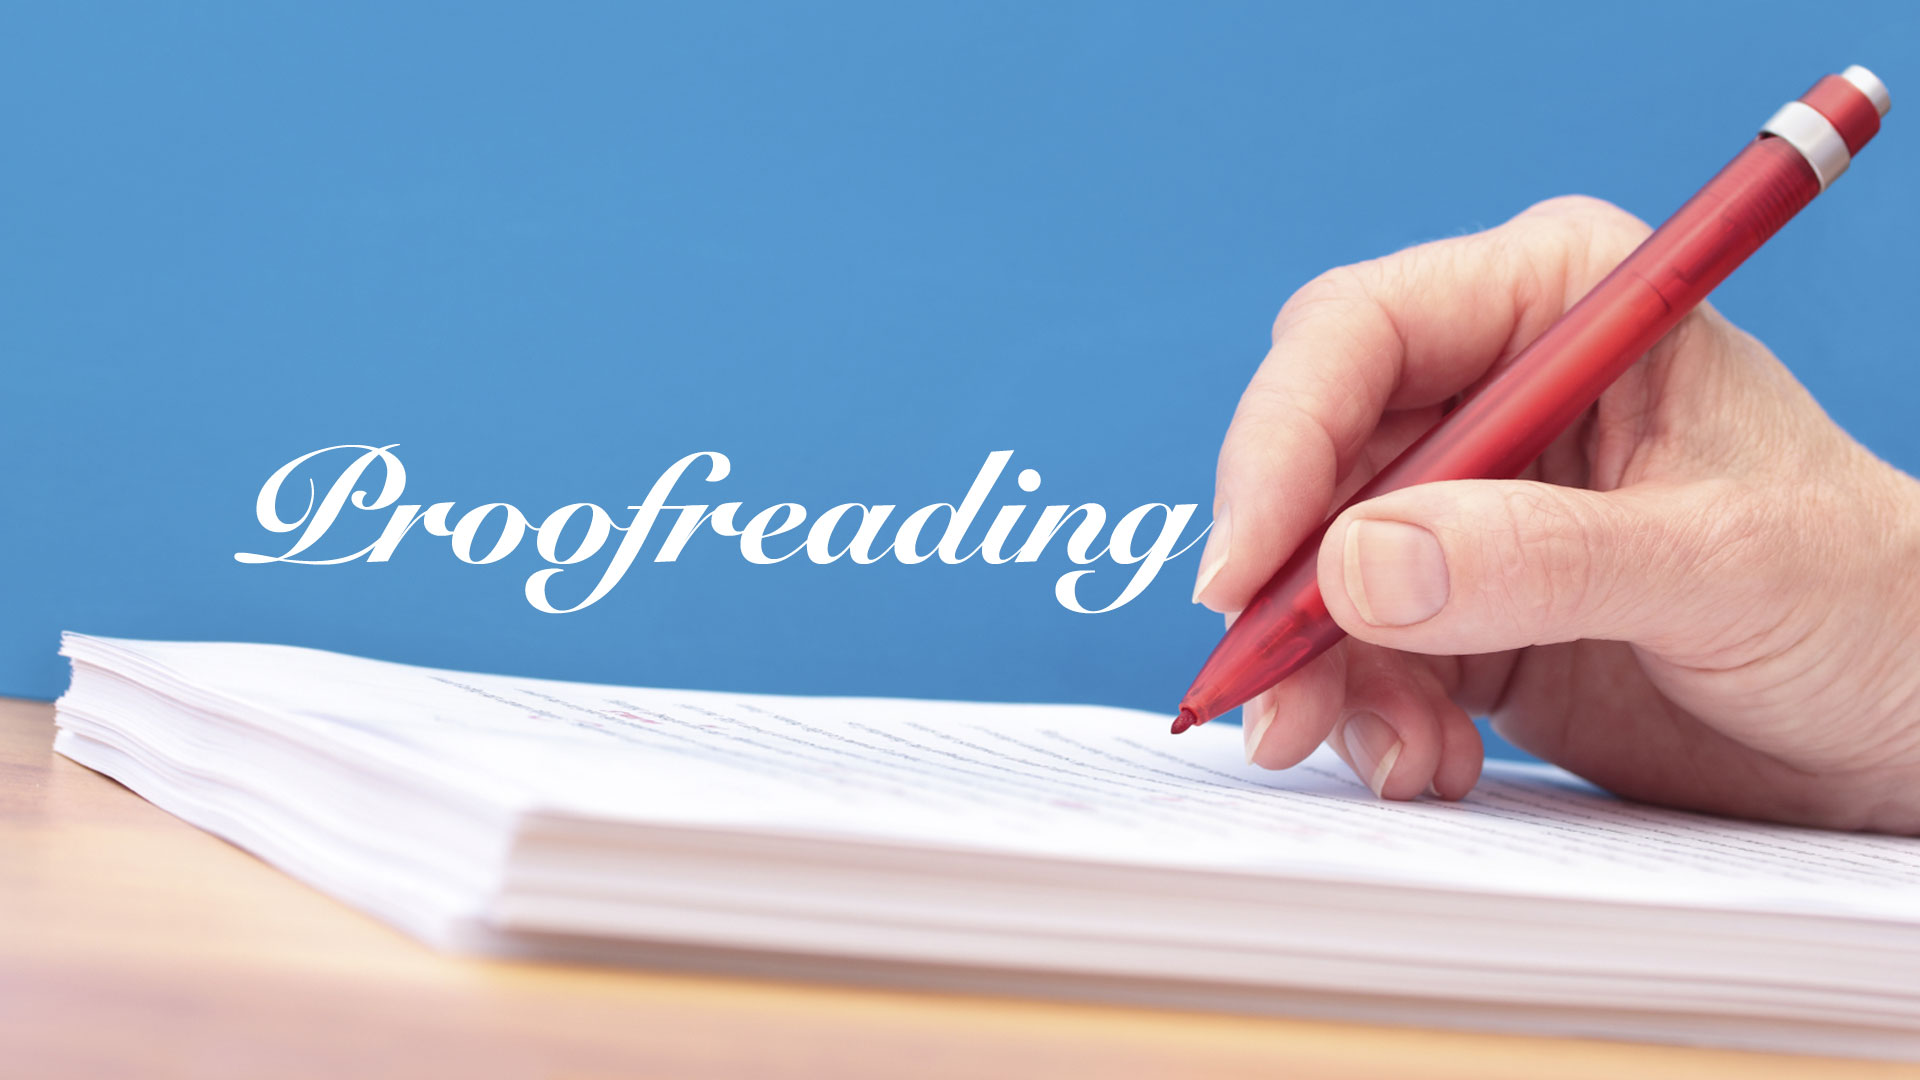 proofreading for essays